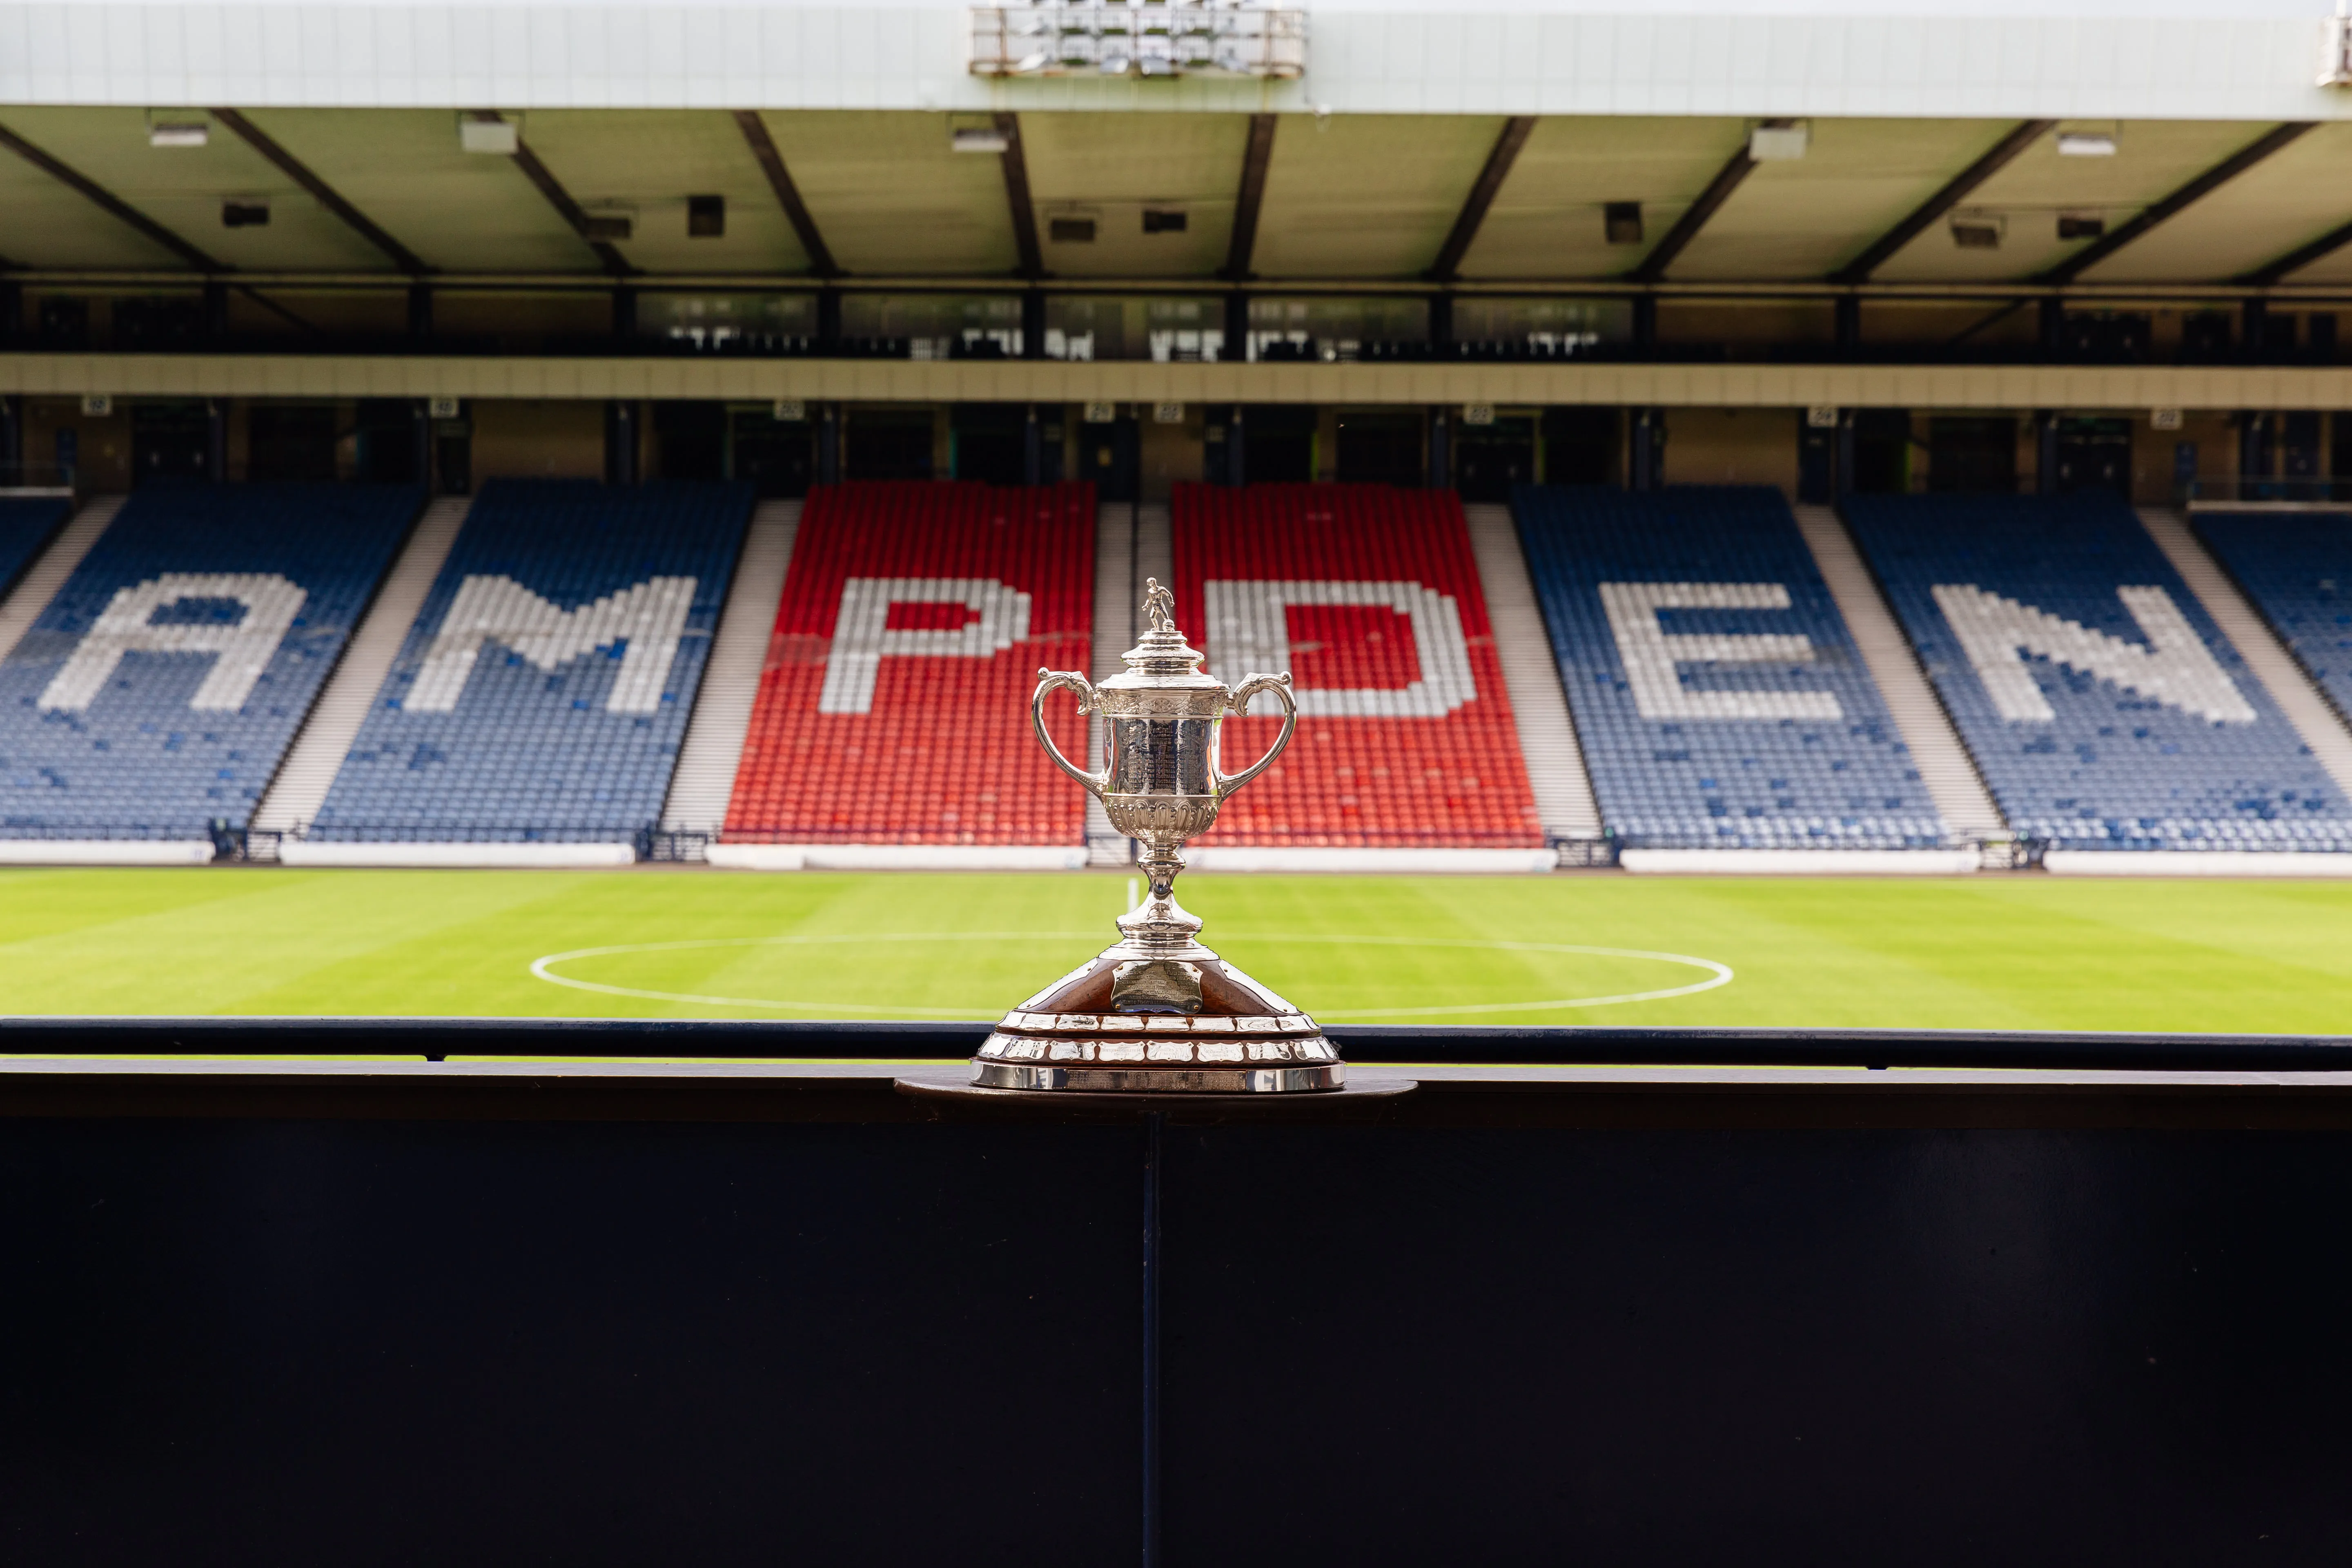 SCOTTISH CUP FINAL EXPERIENCE